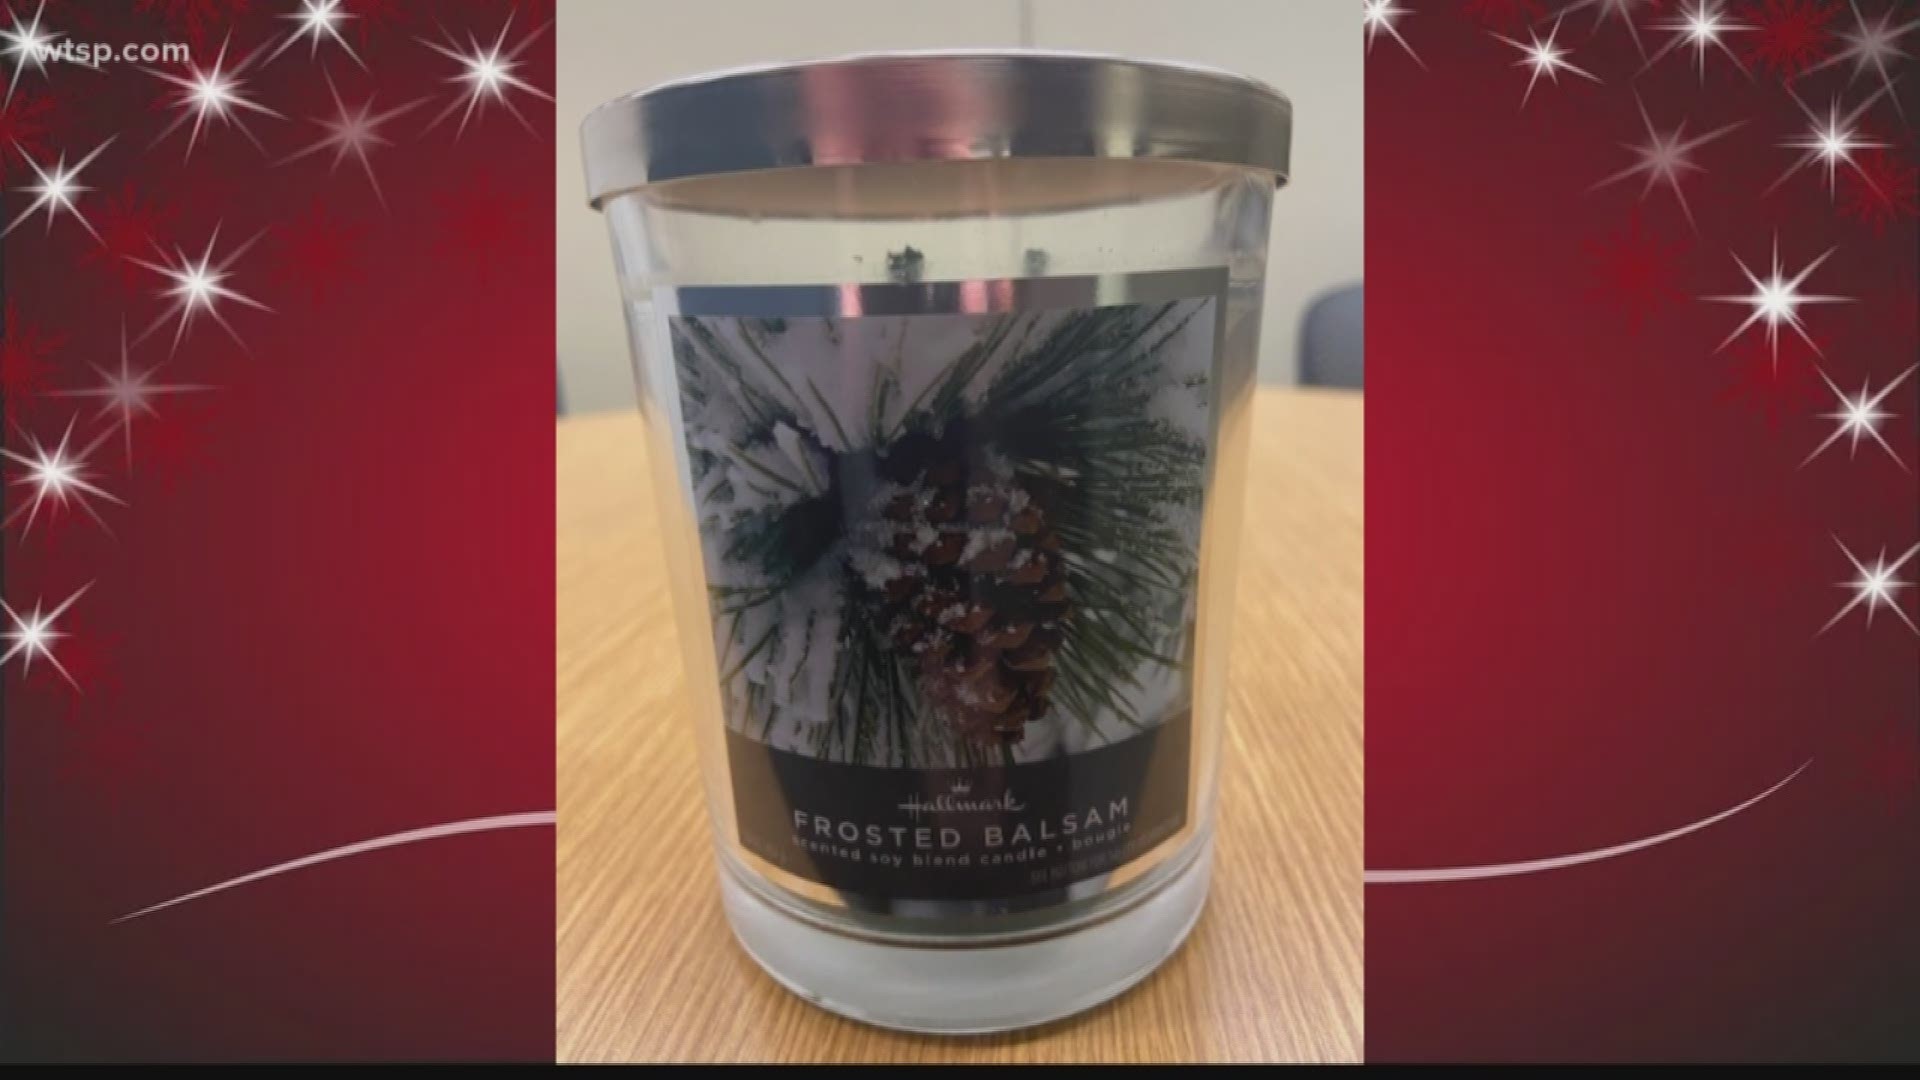 When the company’s balsam soy blend scented candles are lit, the glass jar could break.